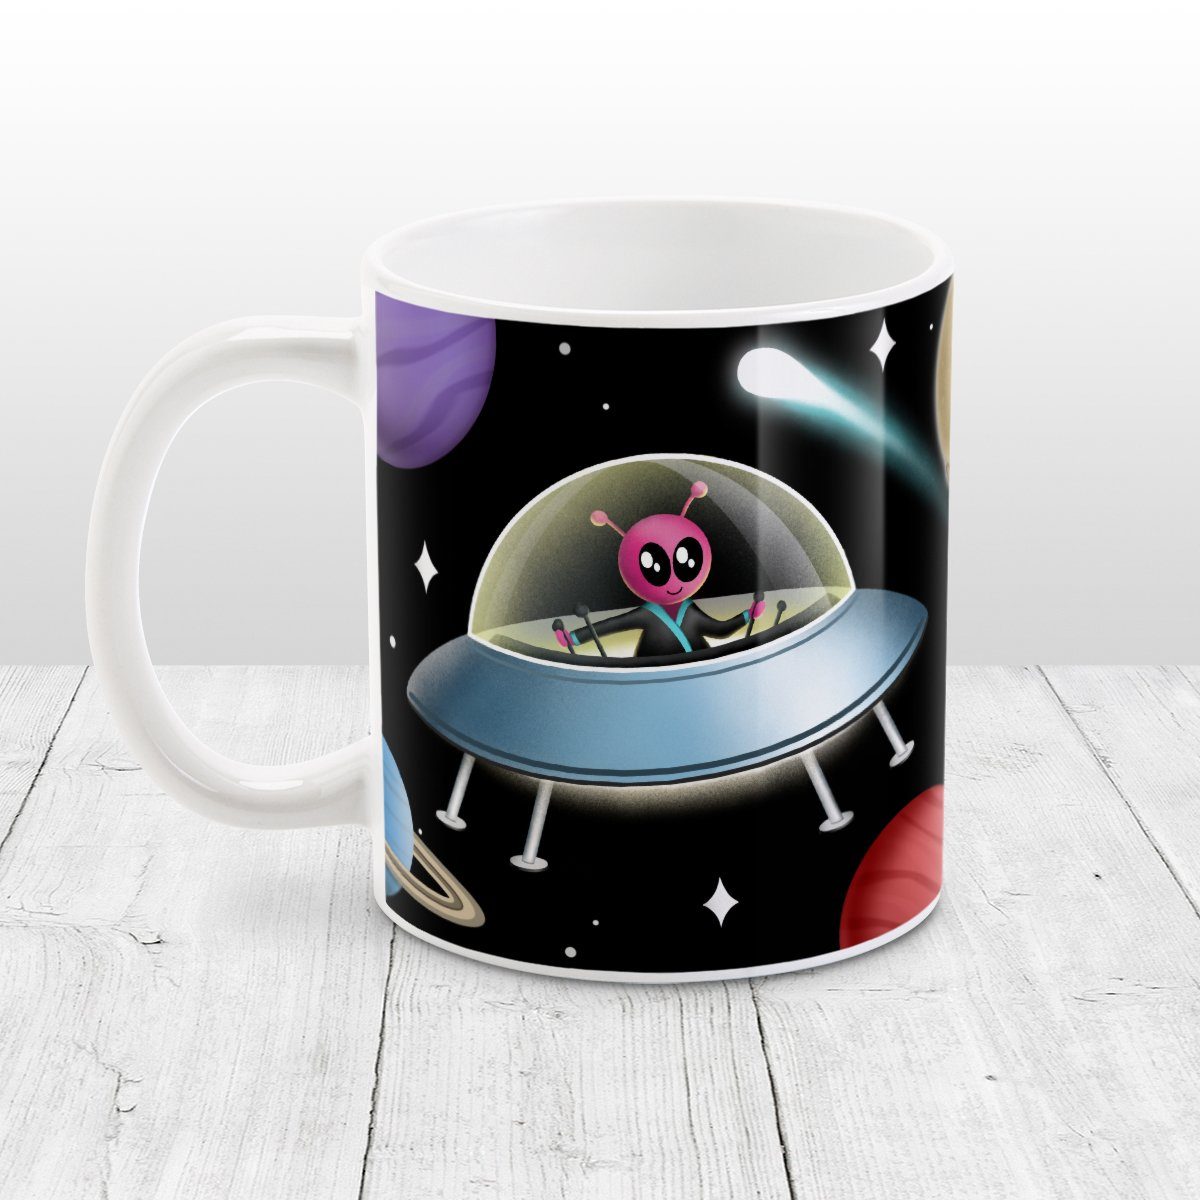 Galaxy Pink Alien Spaceship Mug at Amy's Coffee Mugs. A galaxy spaceship mug designed with an illustration of a pink alien in a spaceship in a galaxy design with planets, stars, comets, and a moon over a black background.